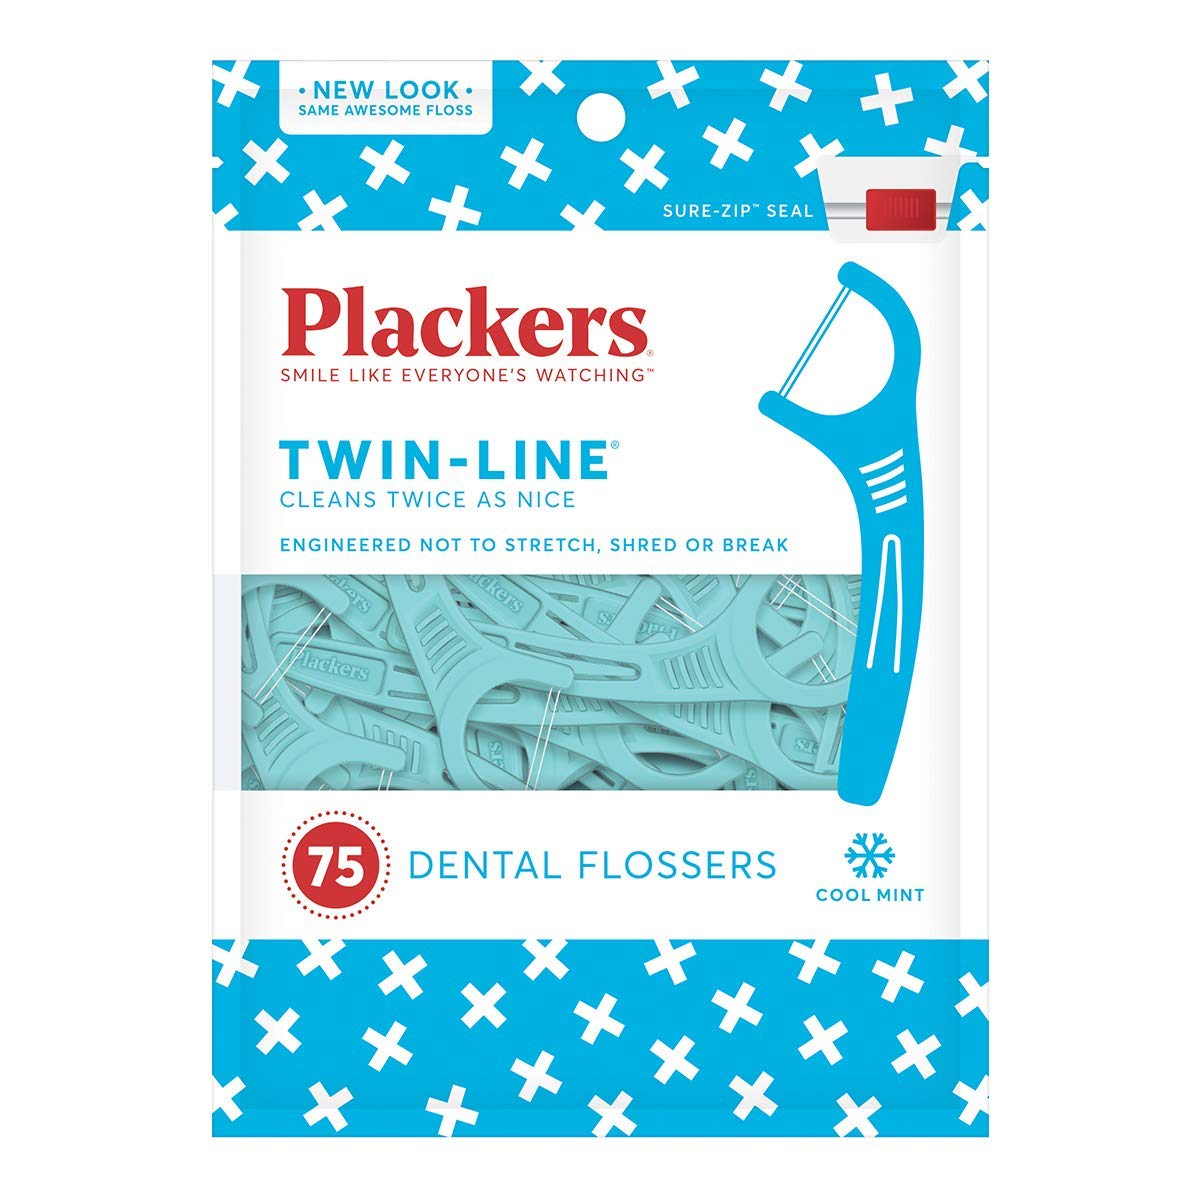 Buy Plackers Top Products at Best Prices online | lazada.com.ph